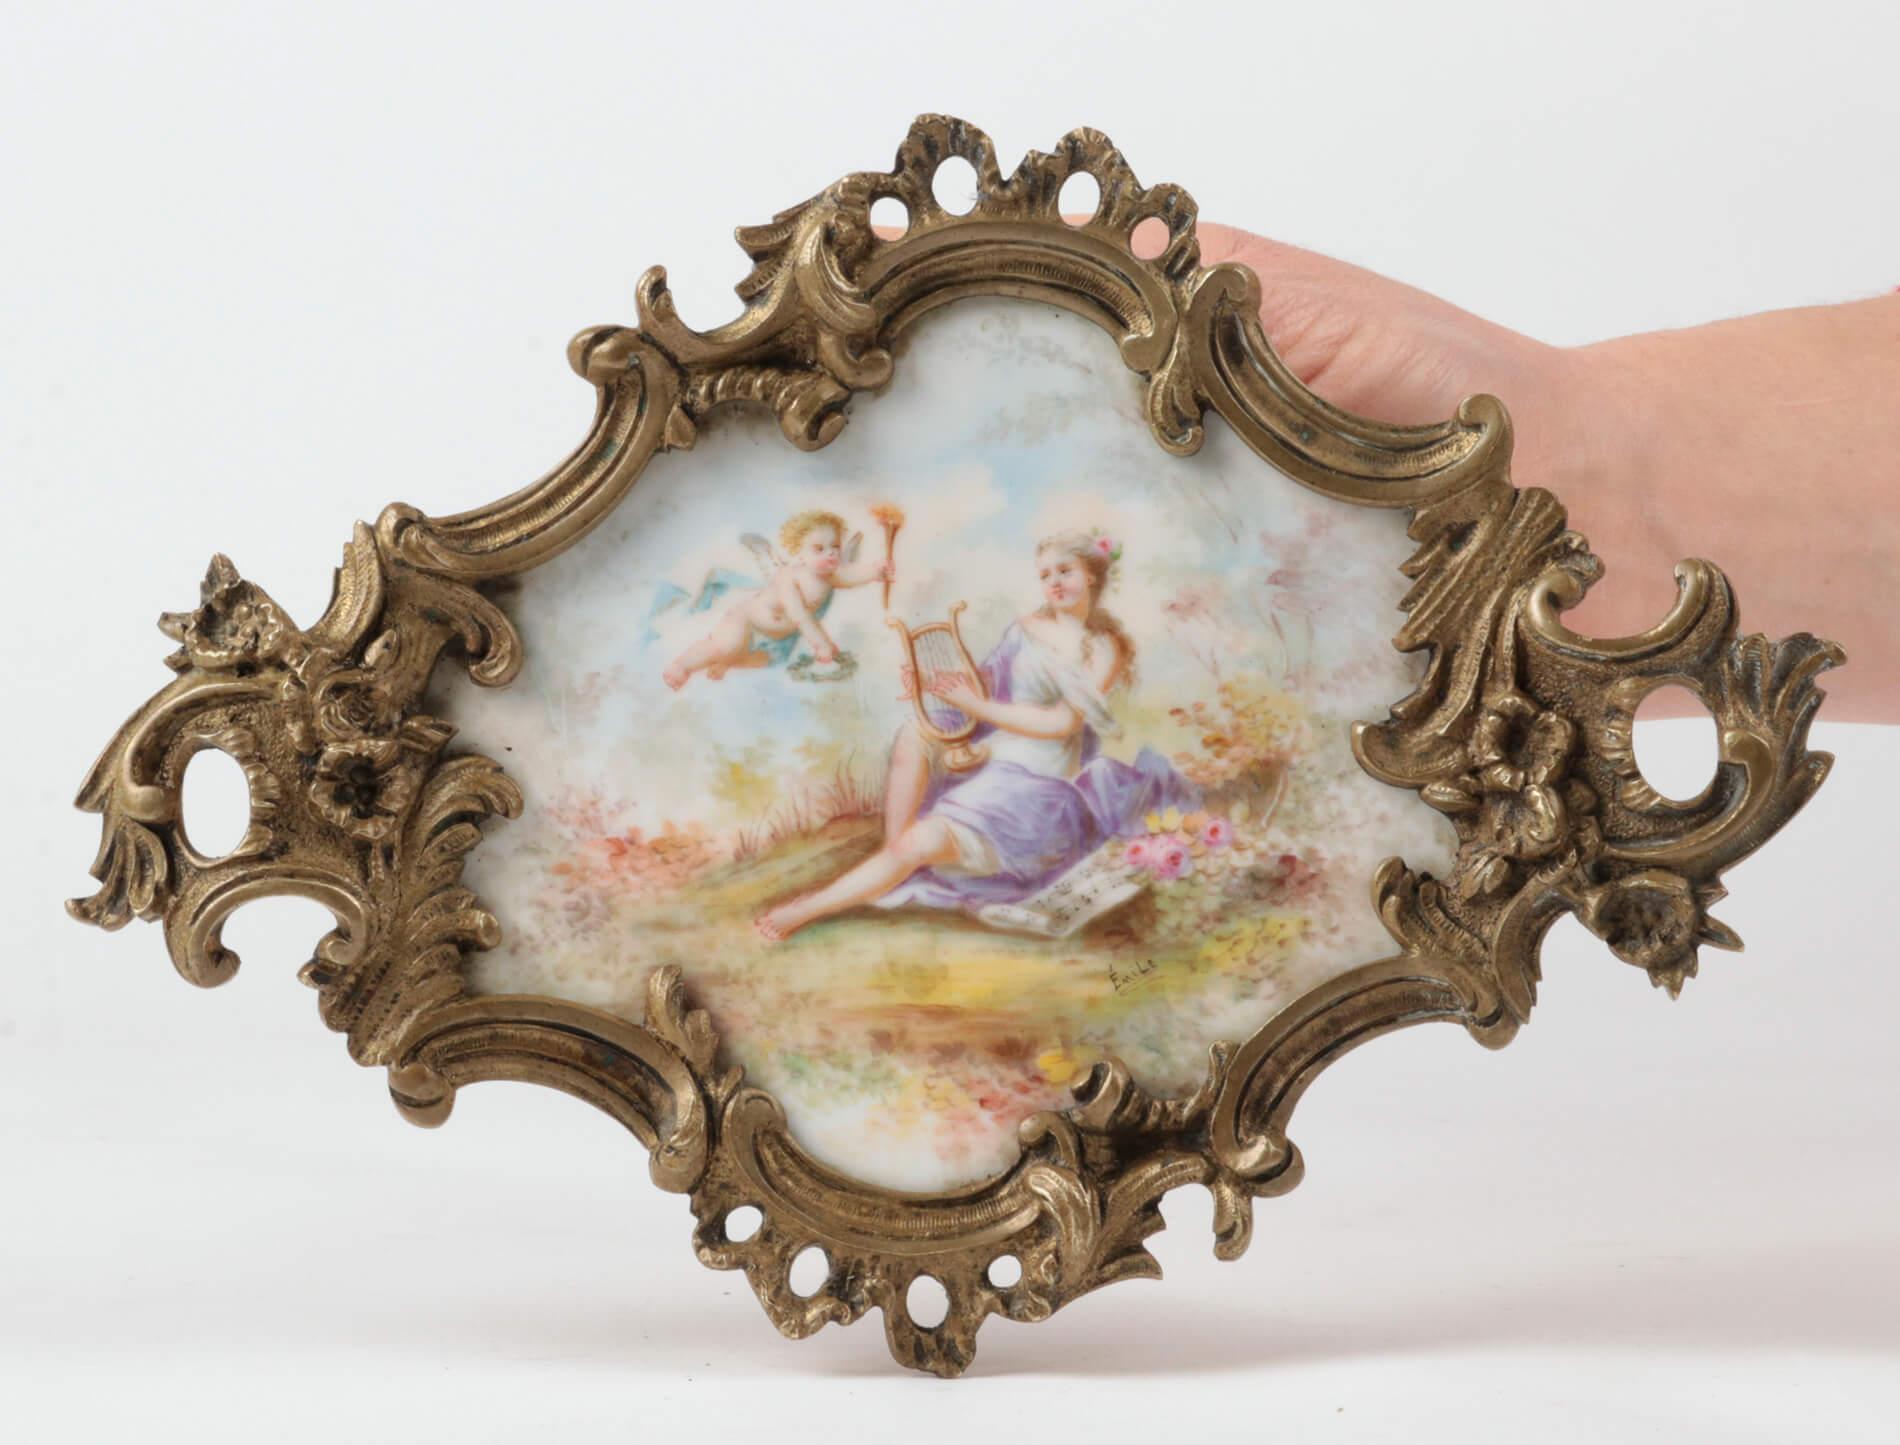 Hand-Painted 19th Century French Romantic Porcelain and Bronze Dish, Signed Émil For Sale